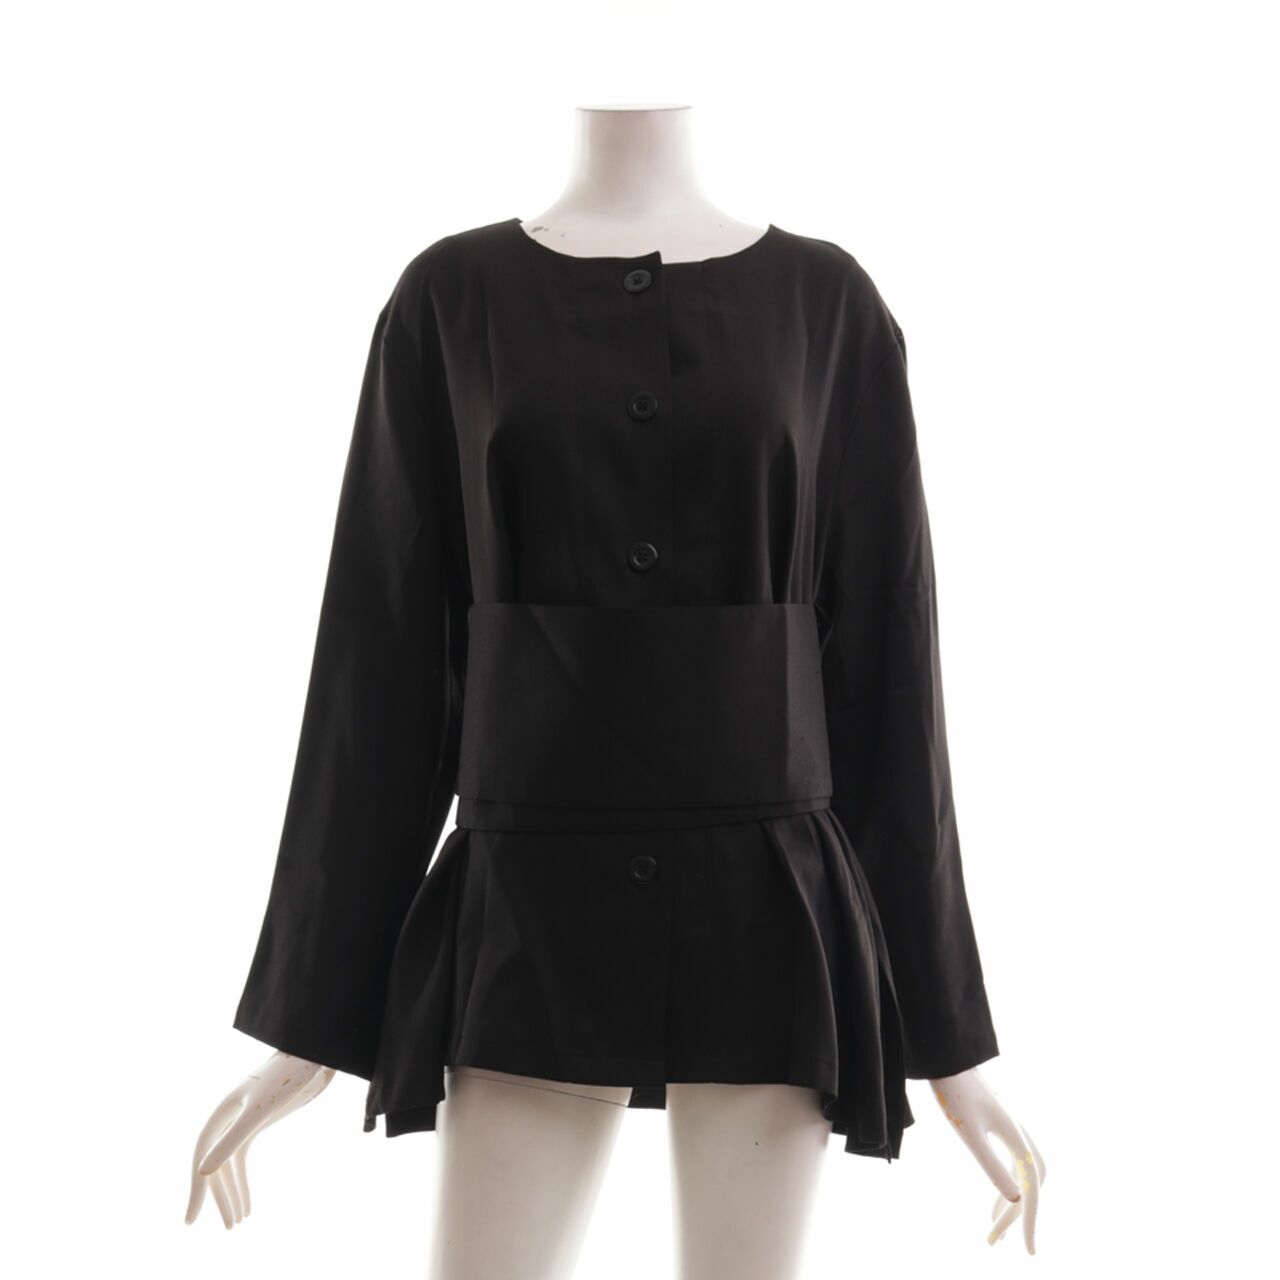 Daily Darling Black Blouse